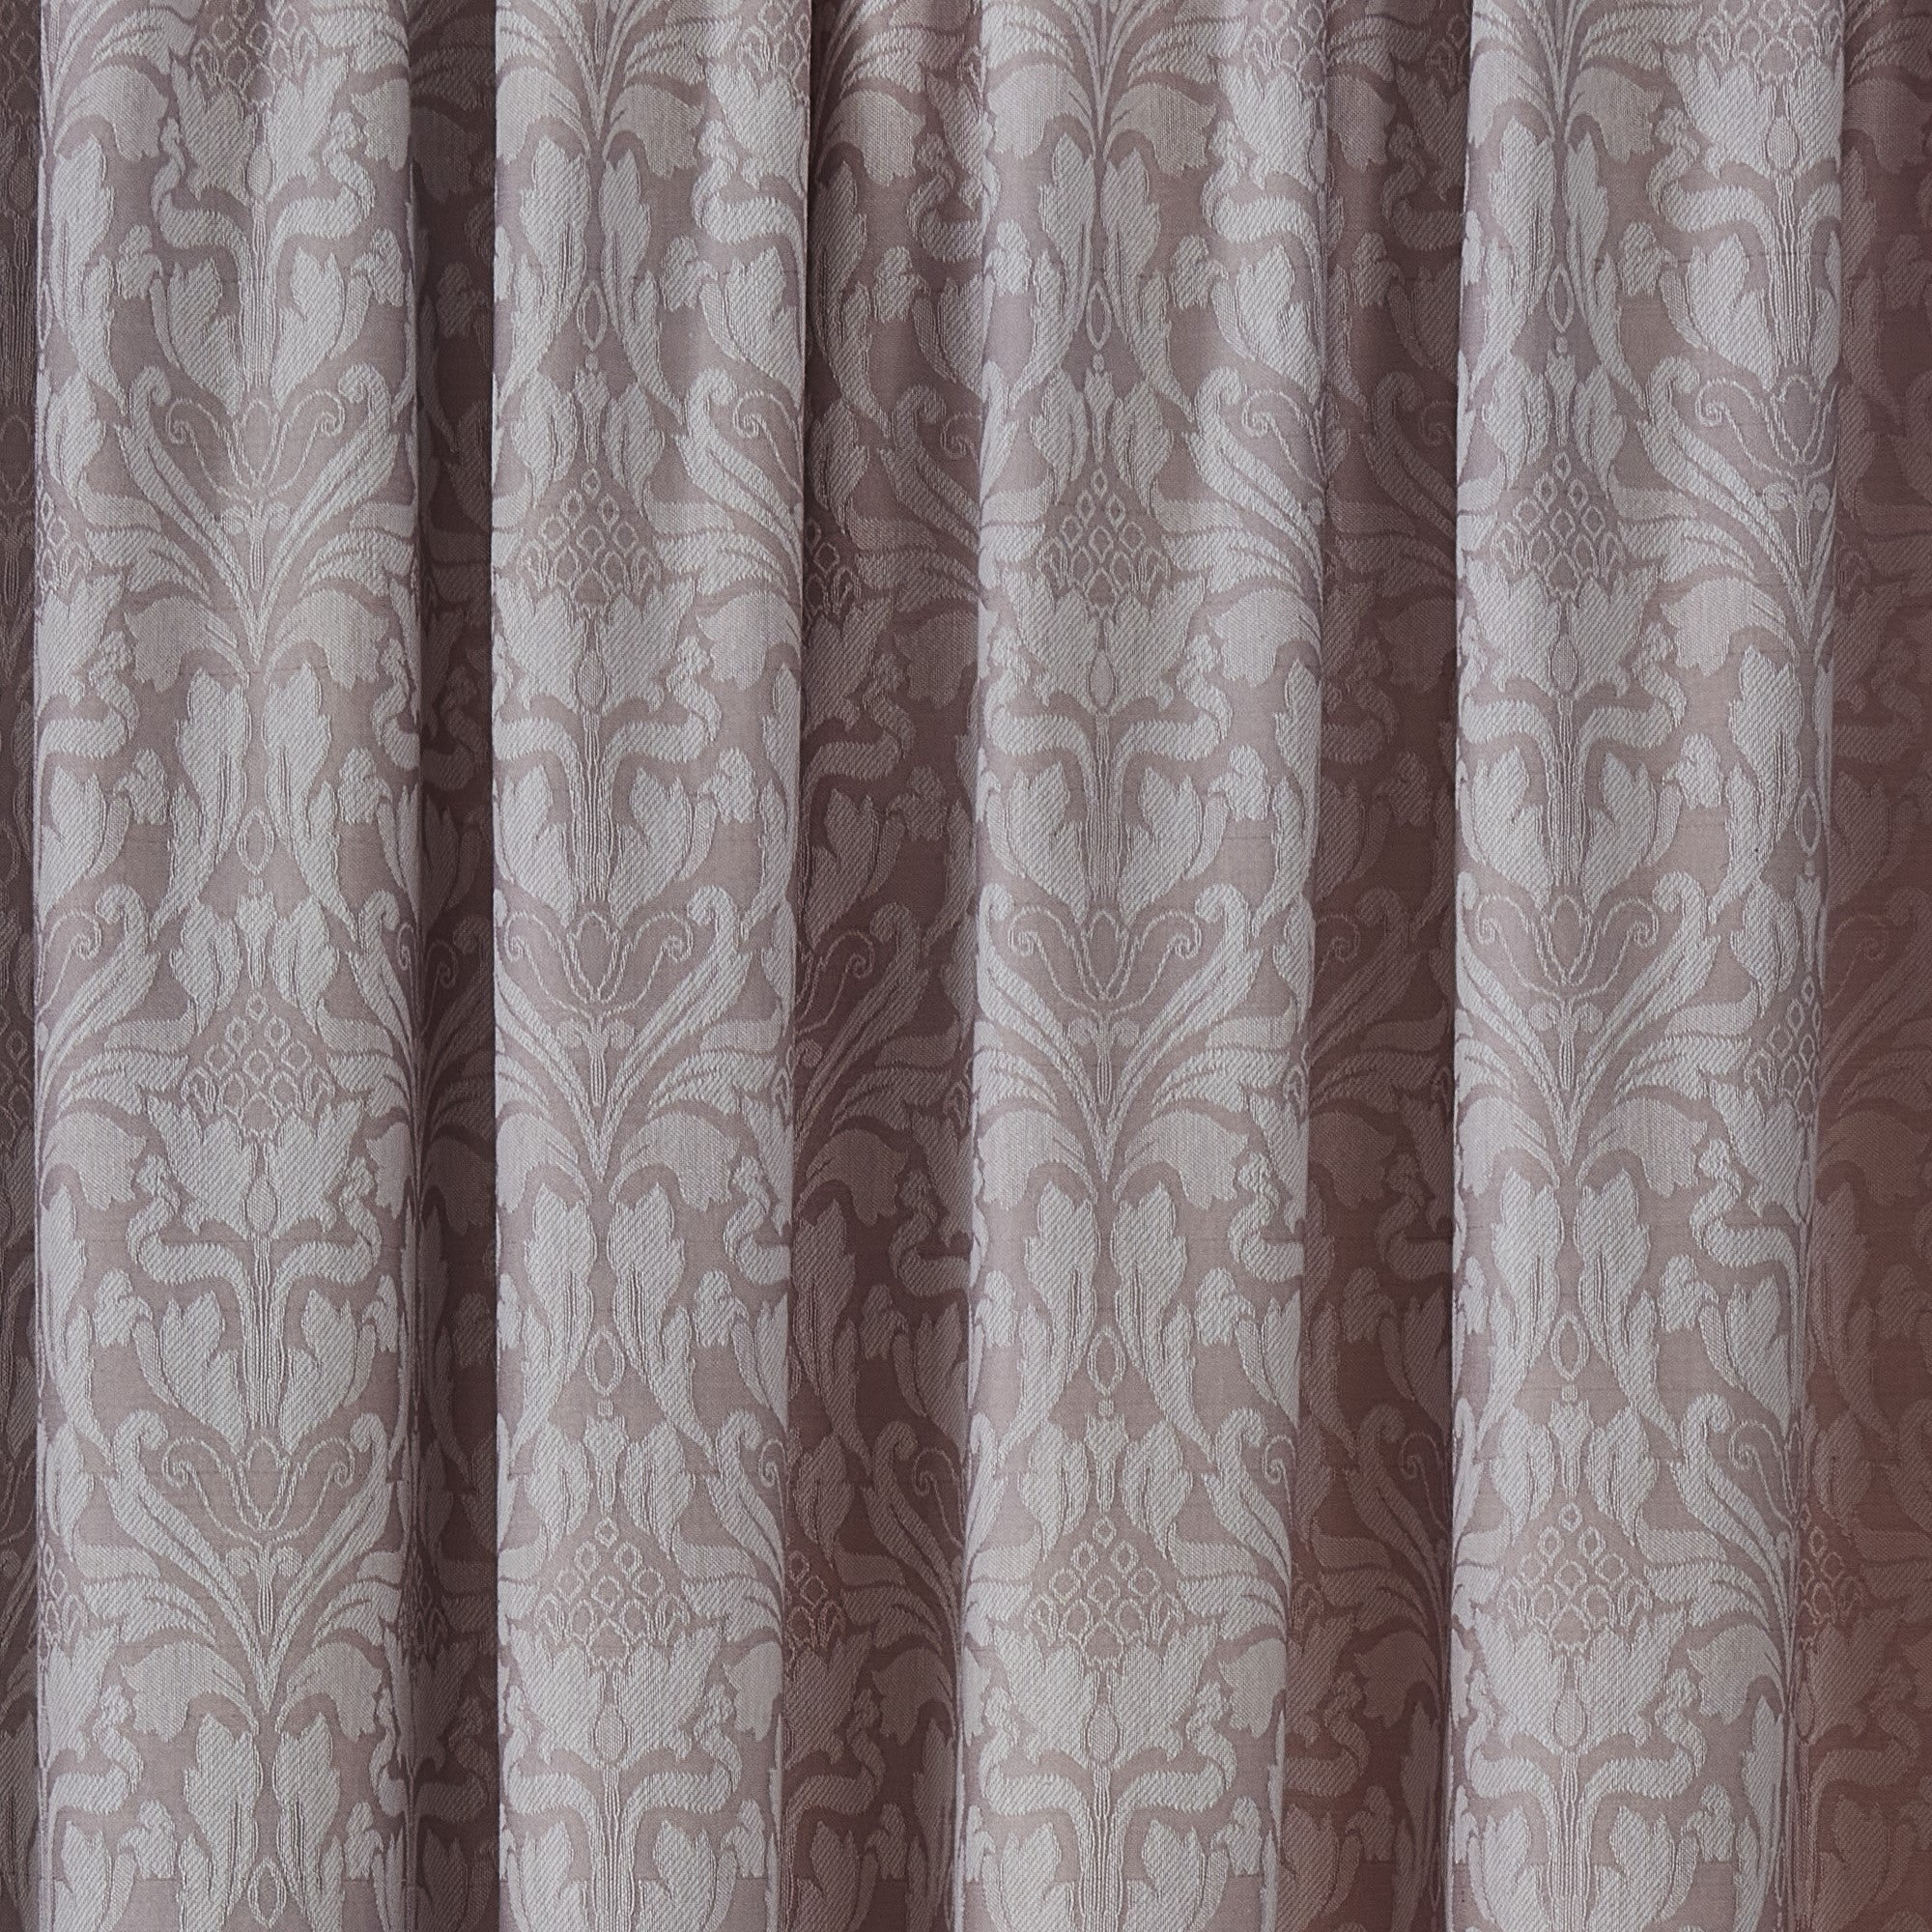 Pair of Pencil Pleat Curtains With Tie-Backs Hawthorne by Dreams & Drapes Woven in Lavender